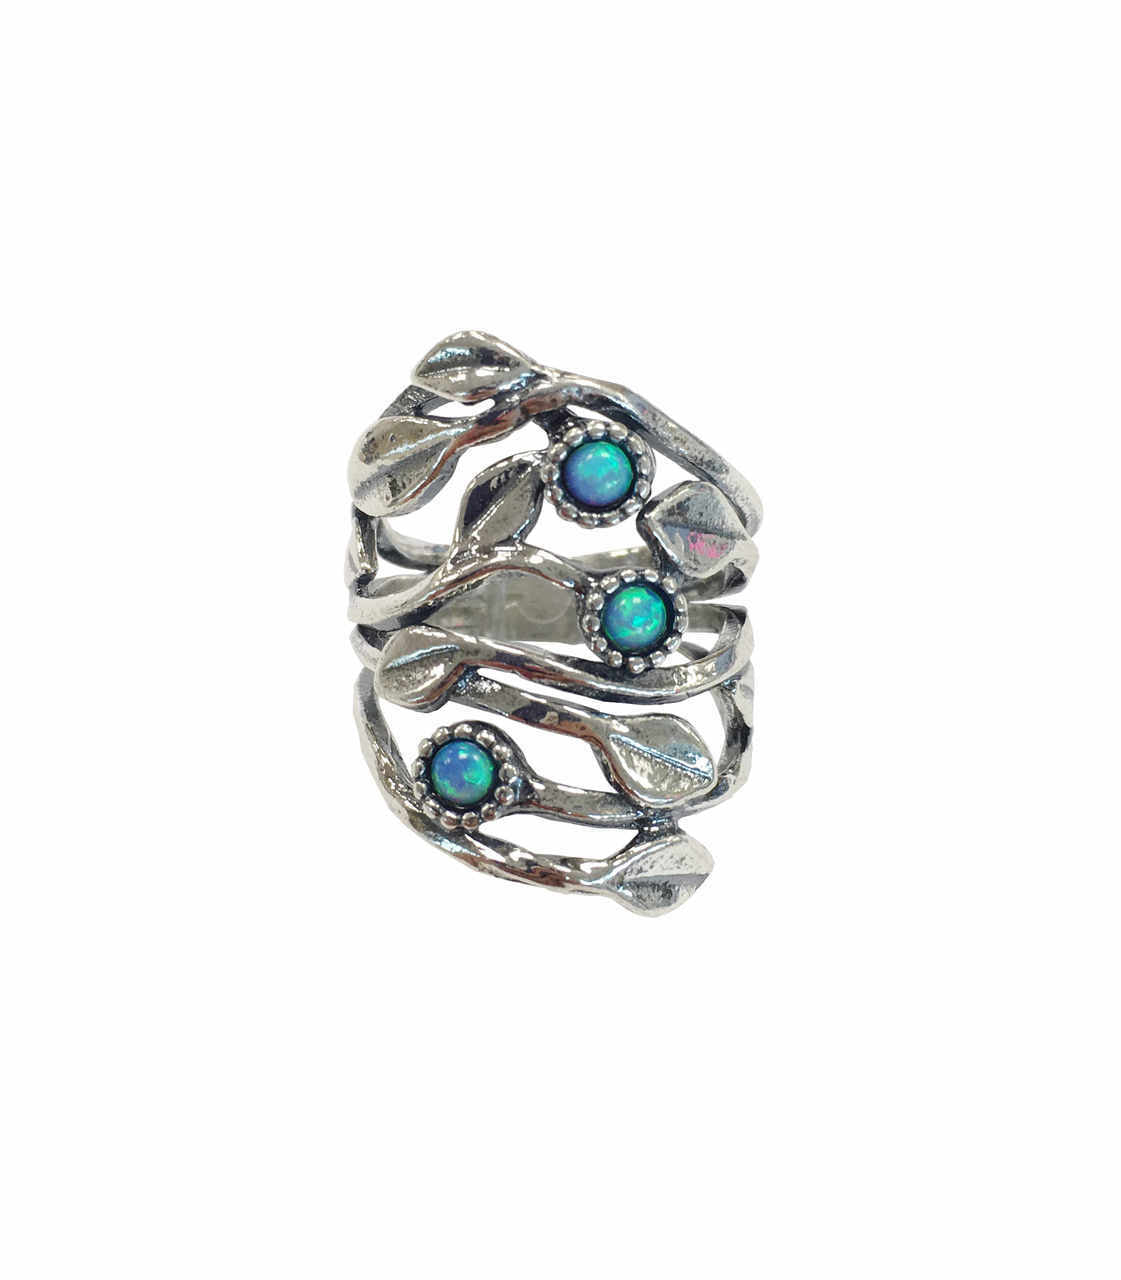 Opal and Leaves Ring - The Nancy Smillie Shop - Art, Jewellery & Designer Gifts Glasgow